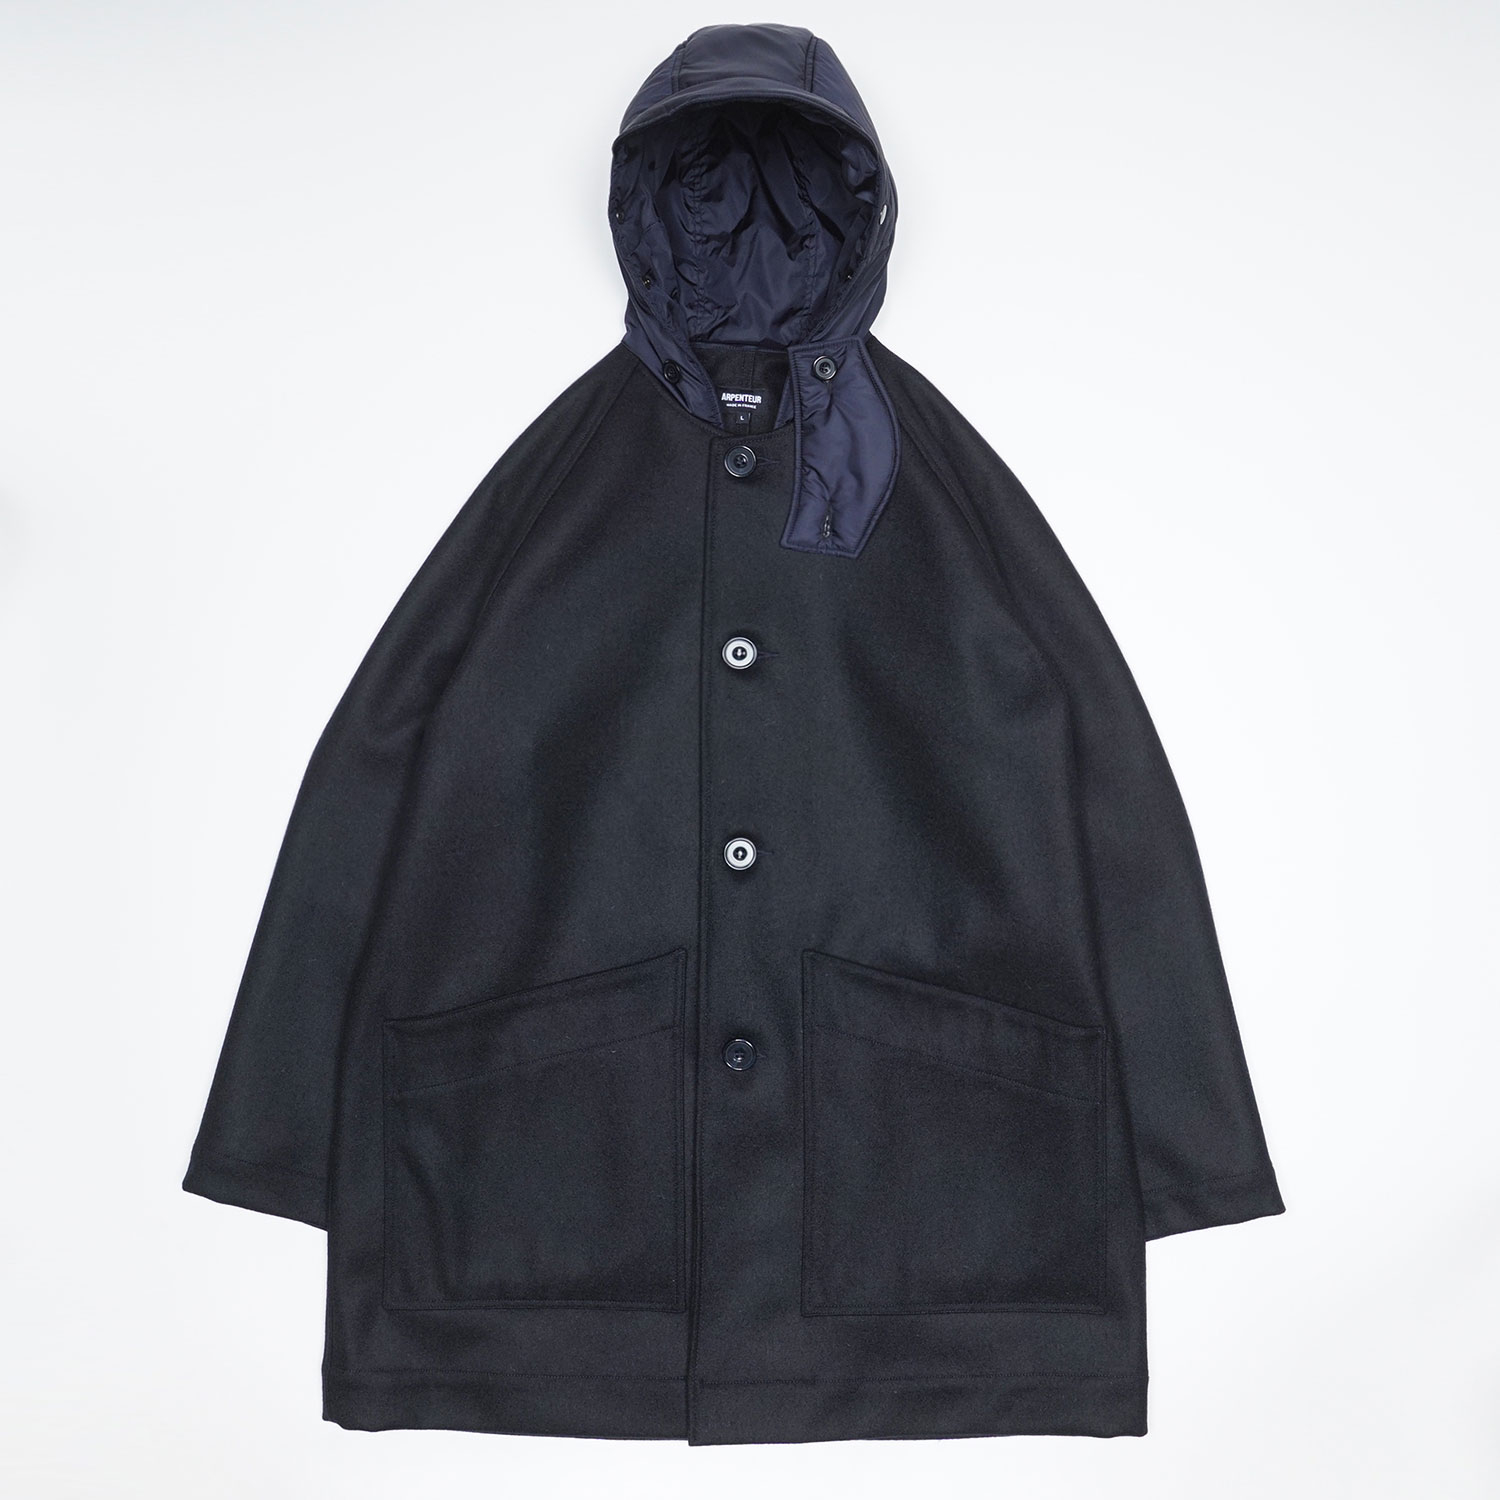 MEVI coat in Midnight blue color by Arpenteur